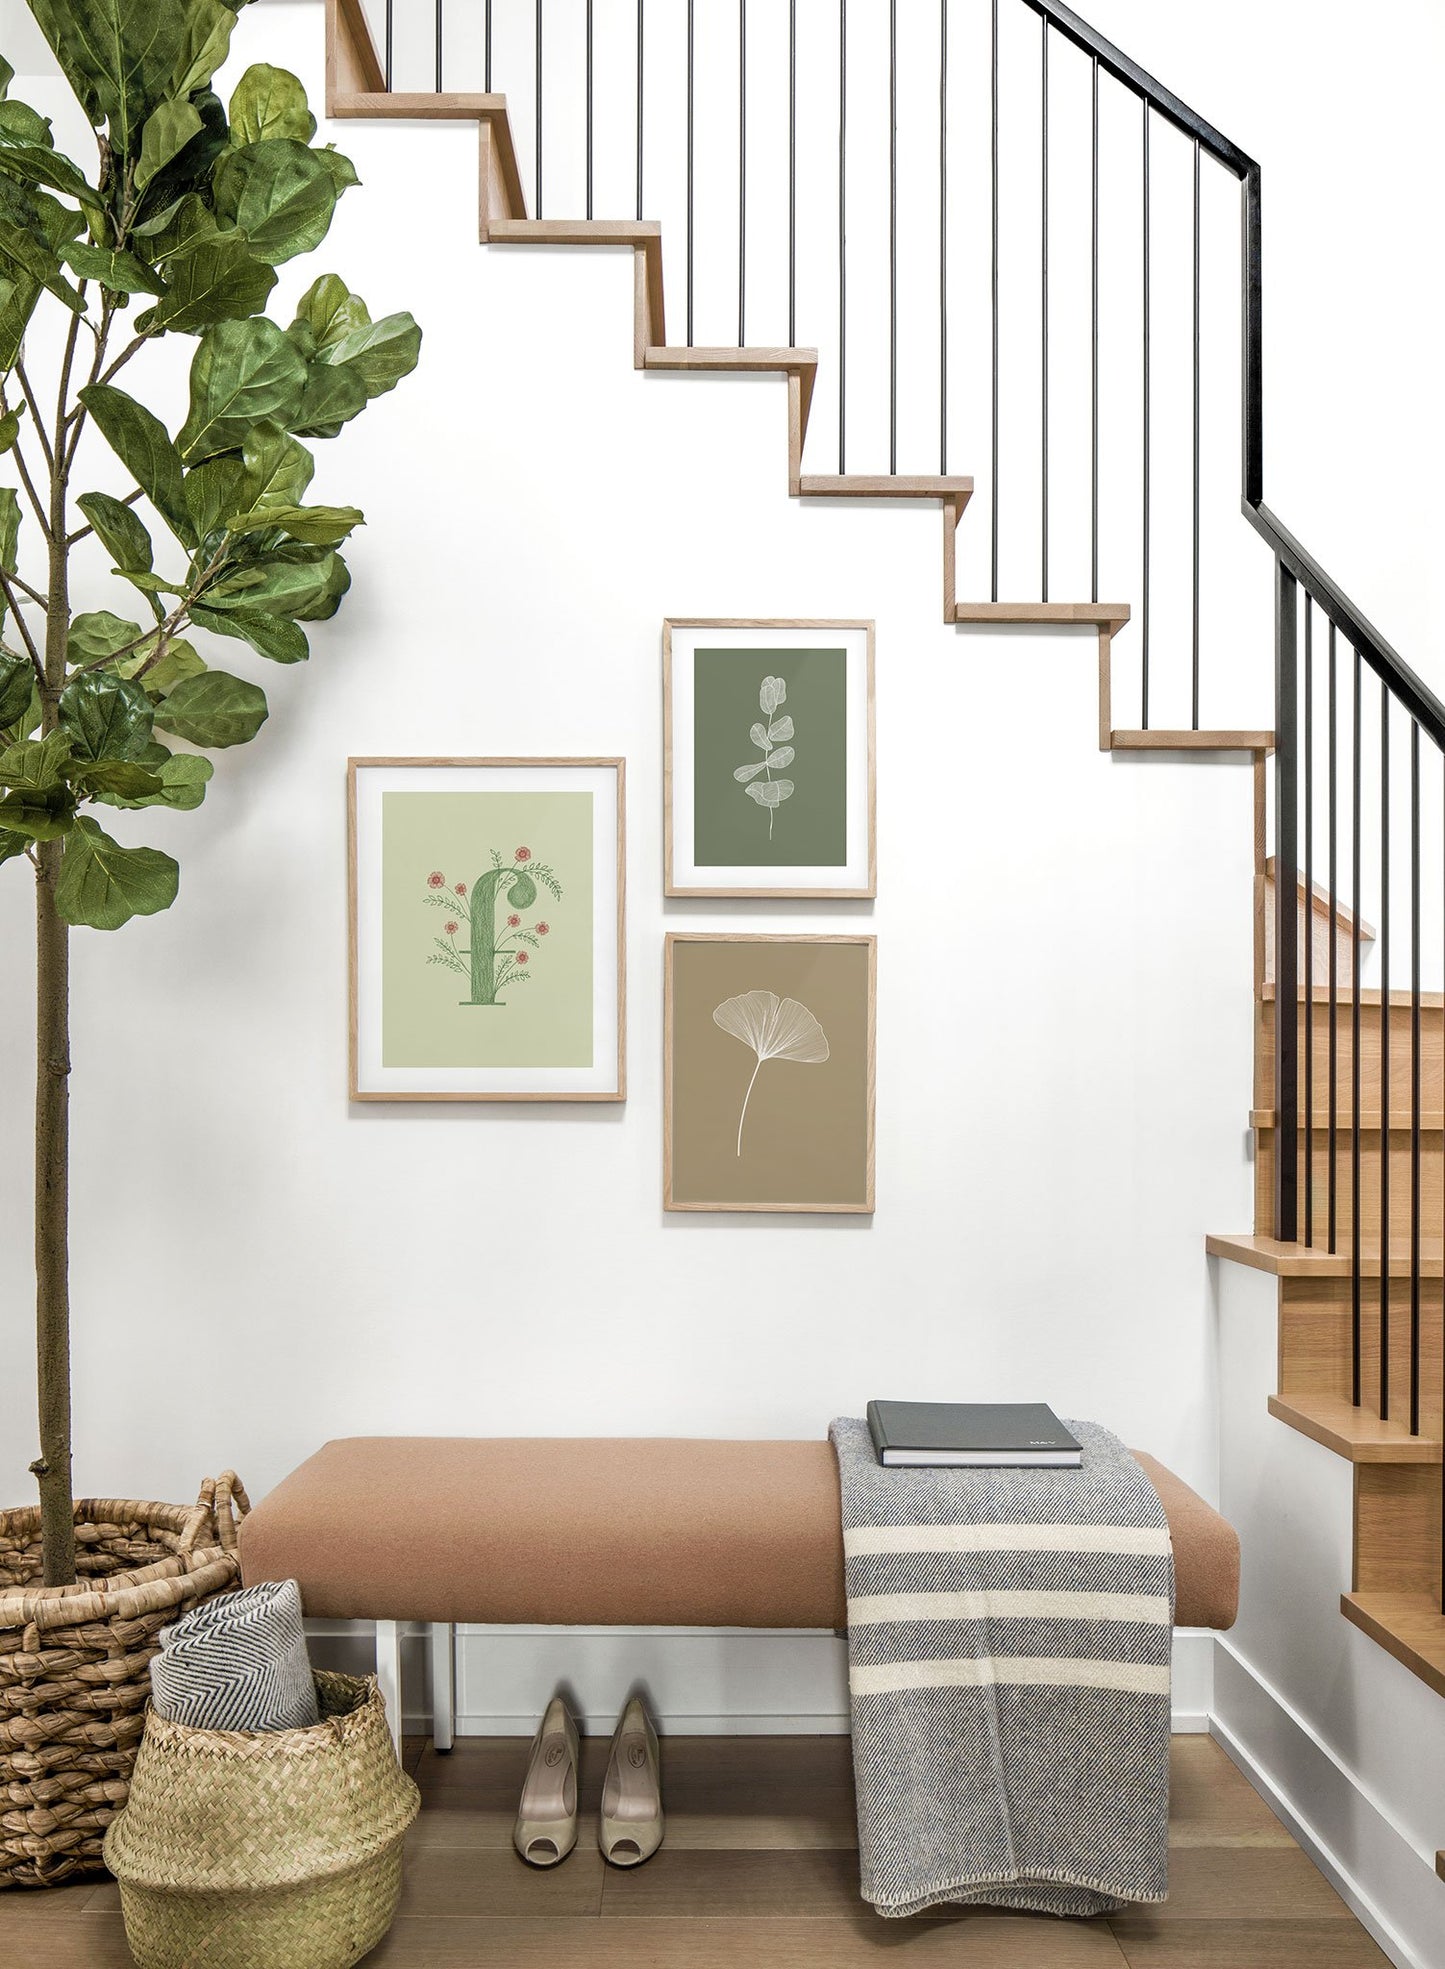 Modern minimalist botanical illustration poster with lined leaves - Lifestyle Trio - Entryway